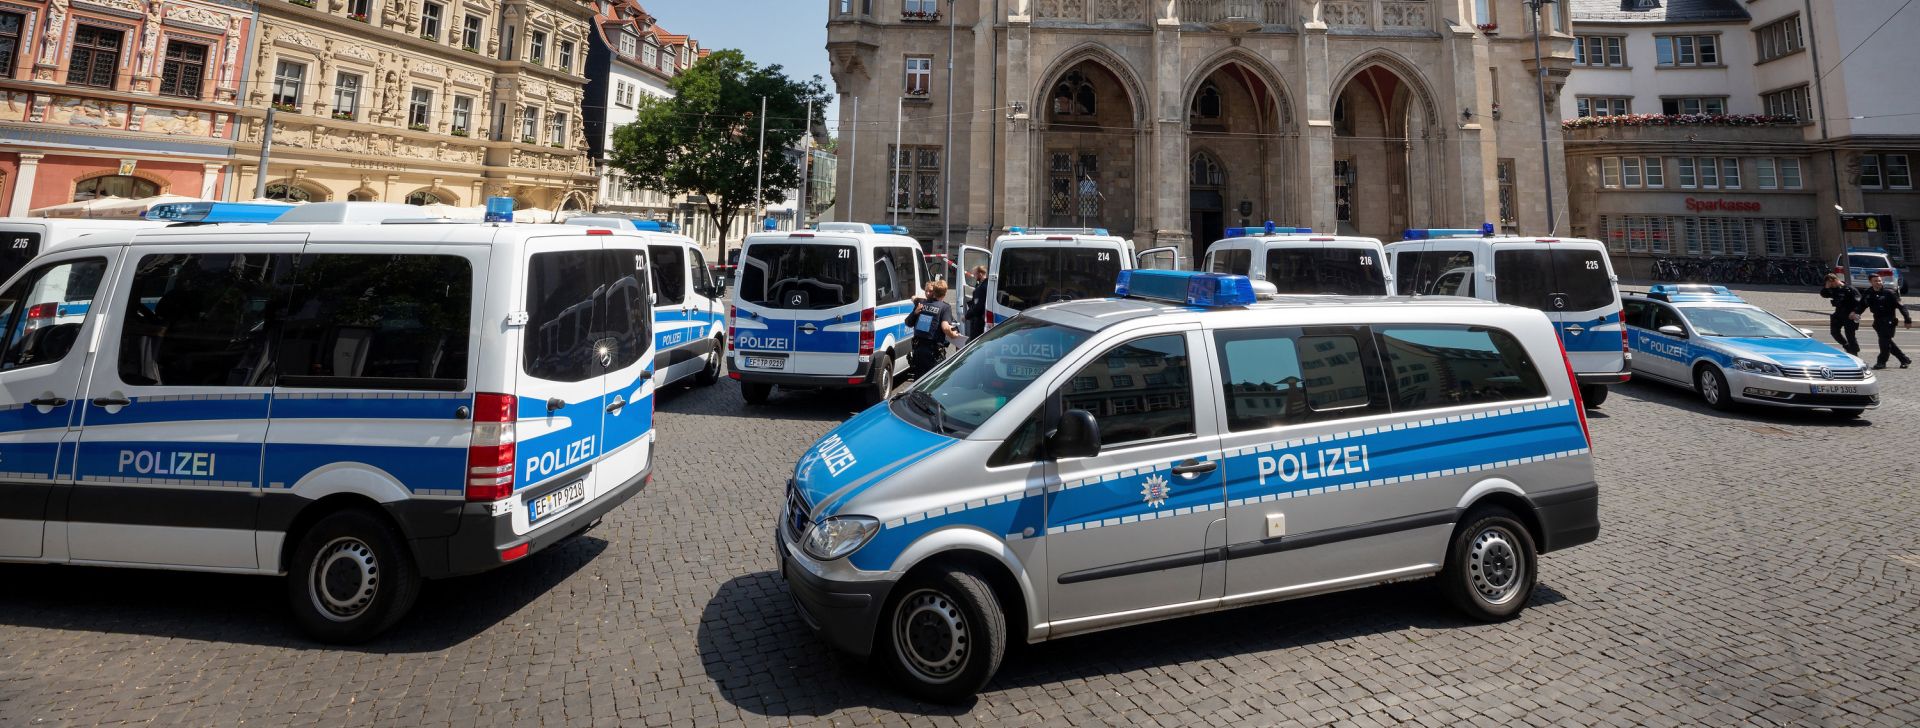 26 June 2019, Thuringia, Erfurt: Police vehicles are parked in front of the evacuated town hall after a bomb threat. Photo: Michael Reichel/dpa-Zentralbild/dpa